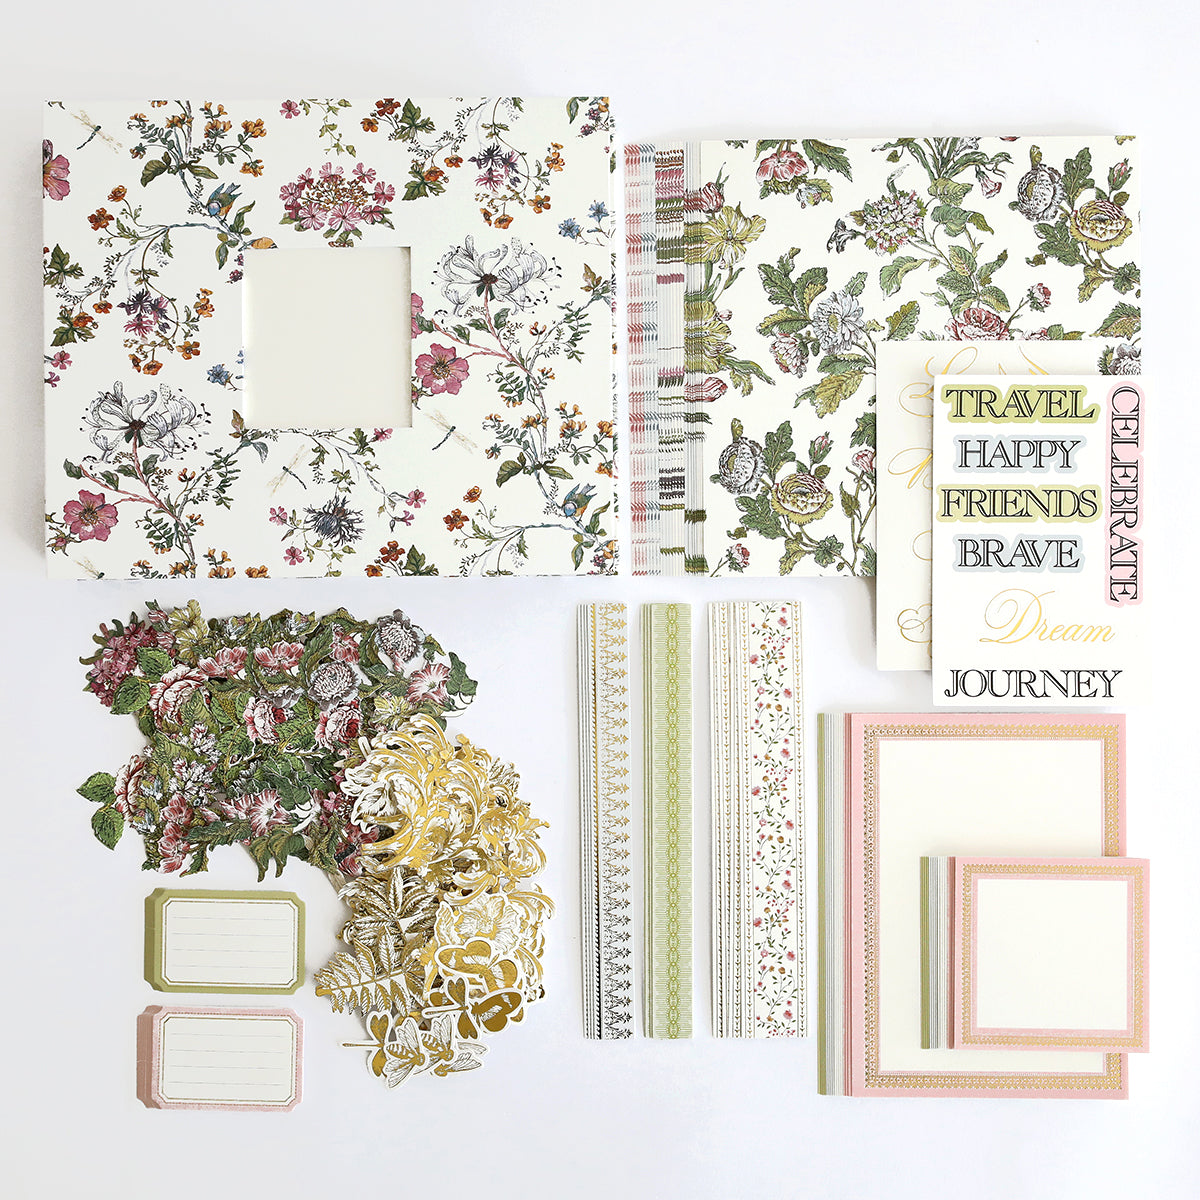 Assorted scrapbooking kit materials including patterned papers, stickers, frames with floral and travel motifs, and journaling tags are included in the Wildflower Meadow Mini Album.